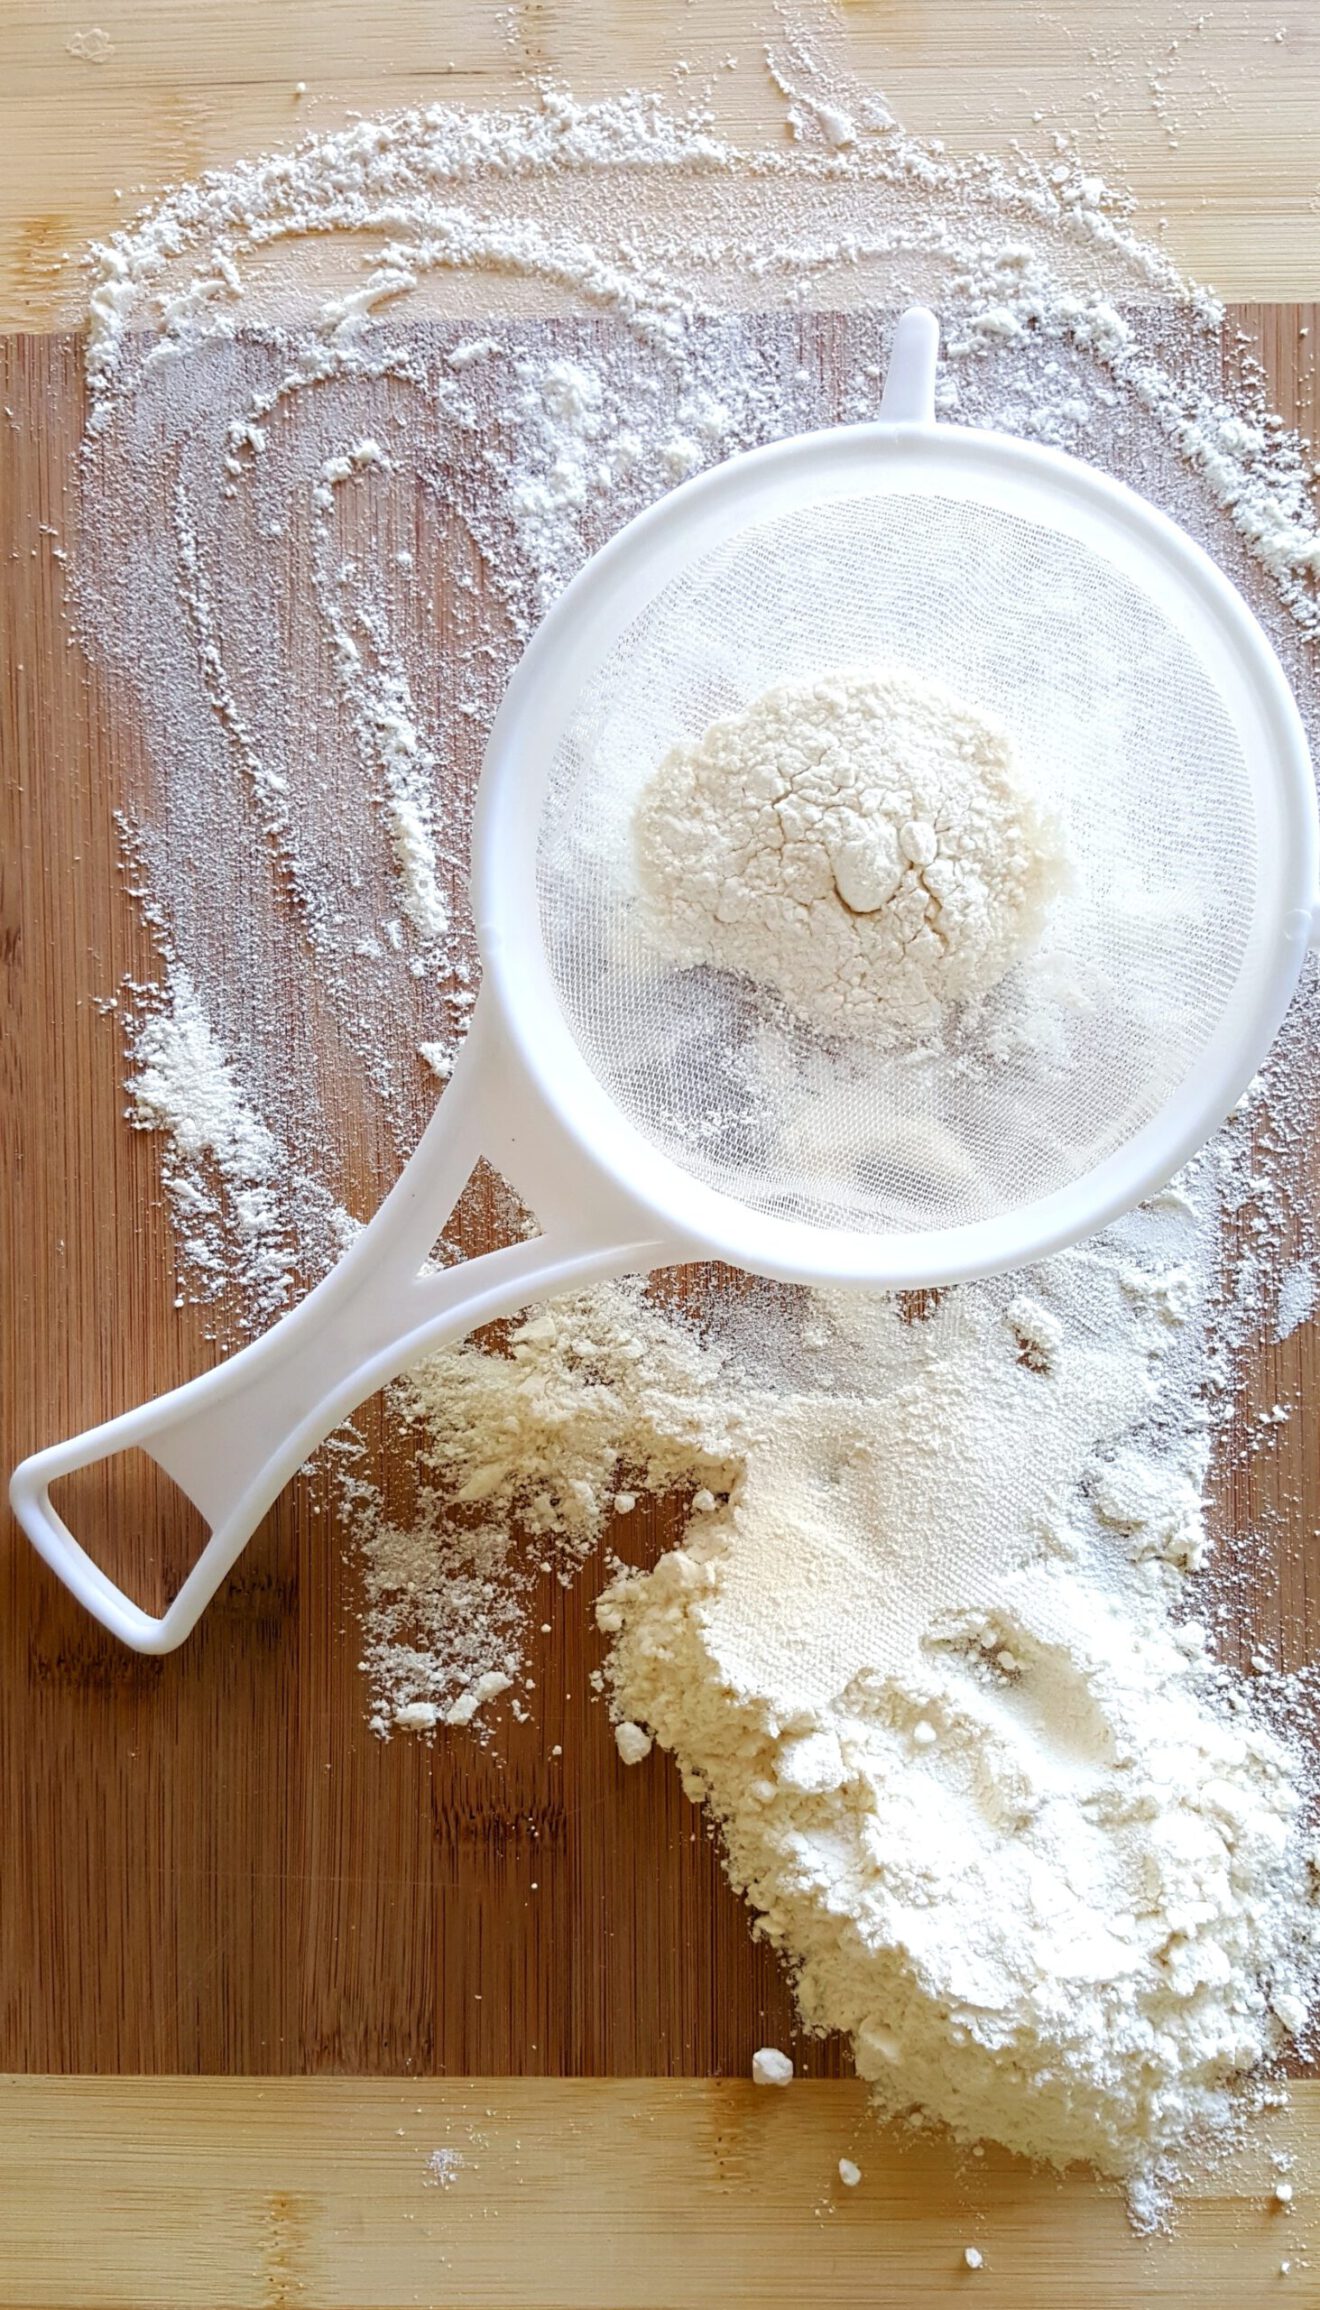 Consumers, chefs increasingly turn to alternative flour